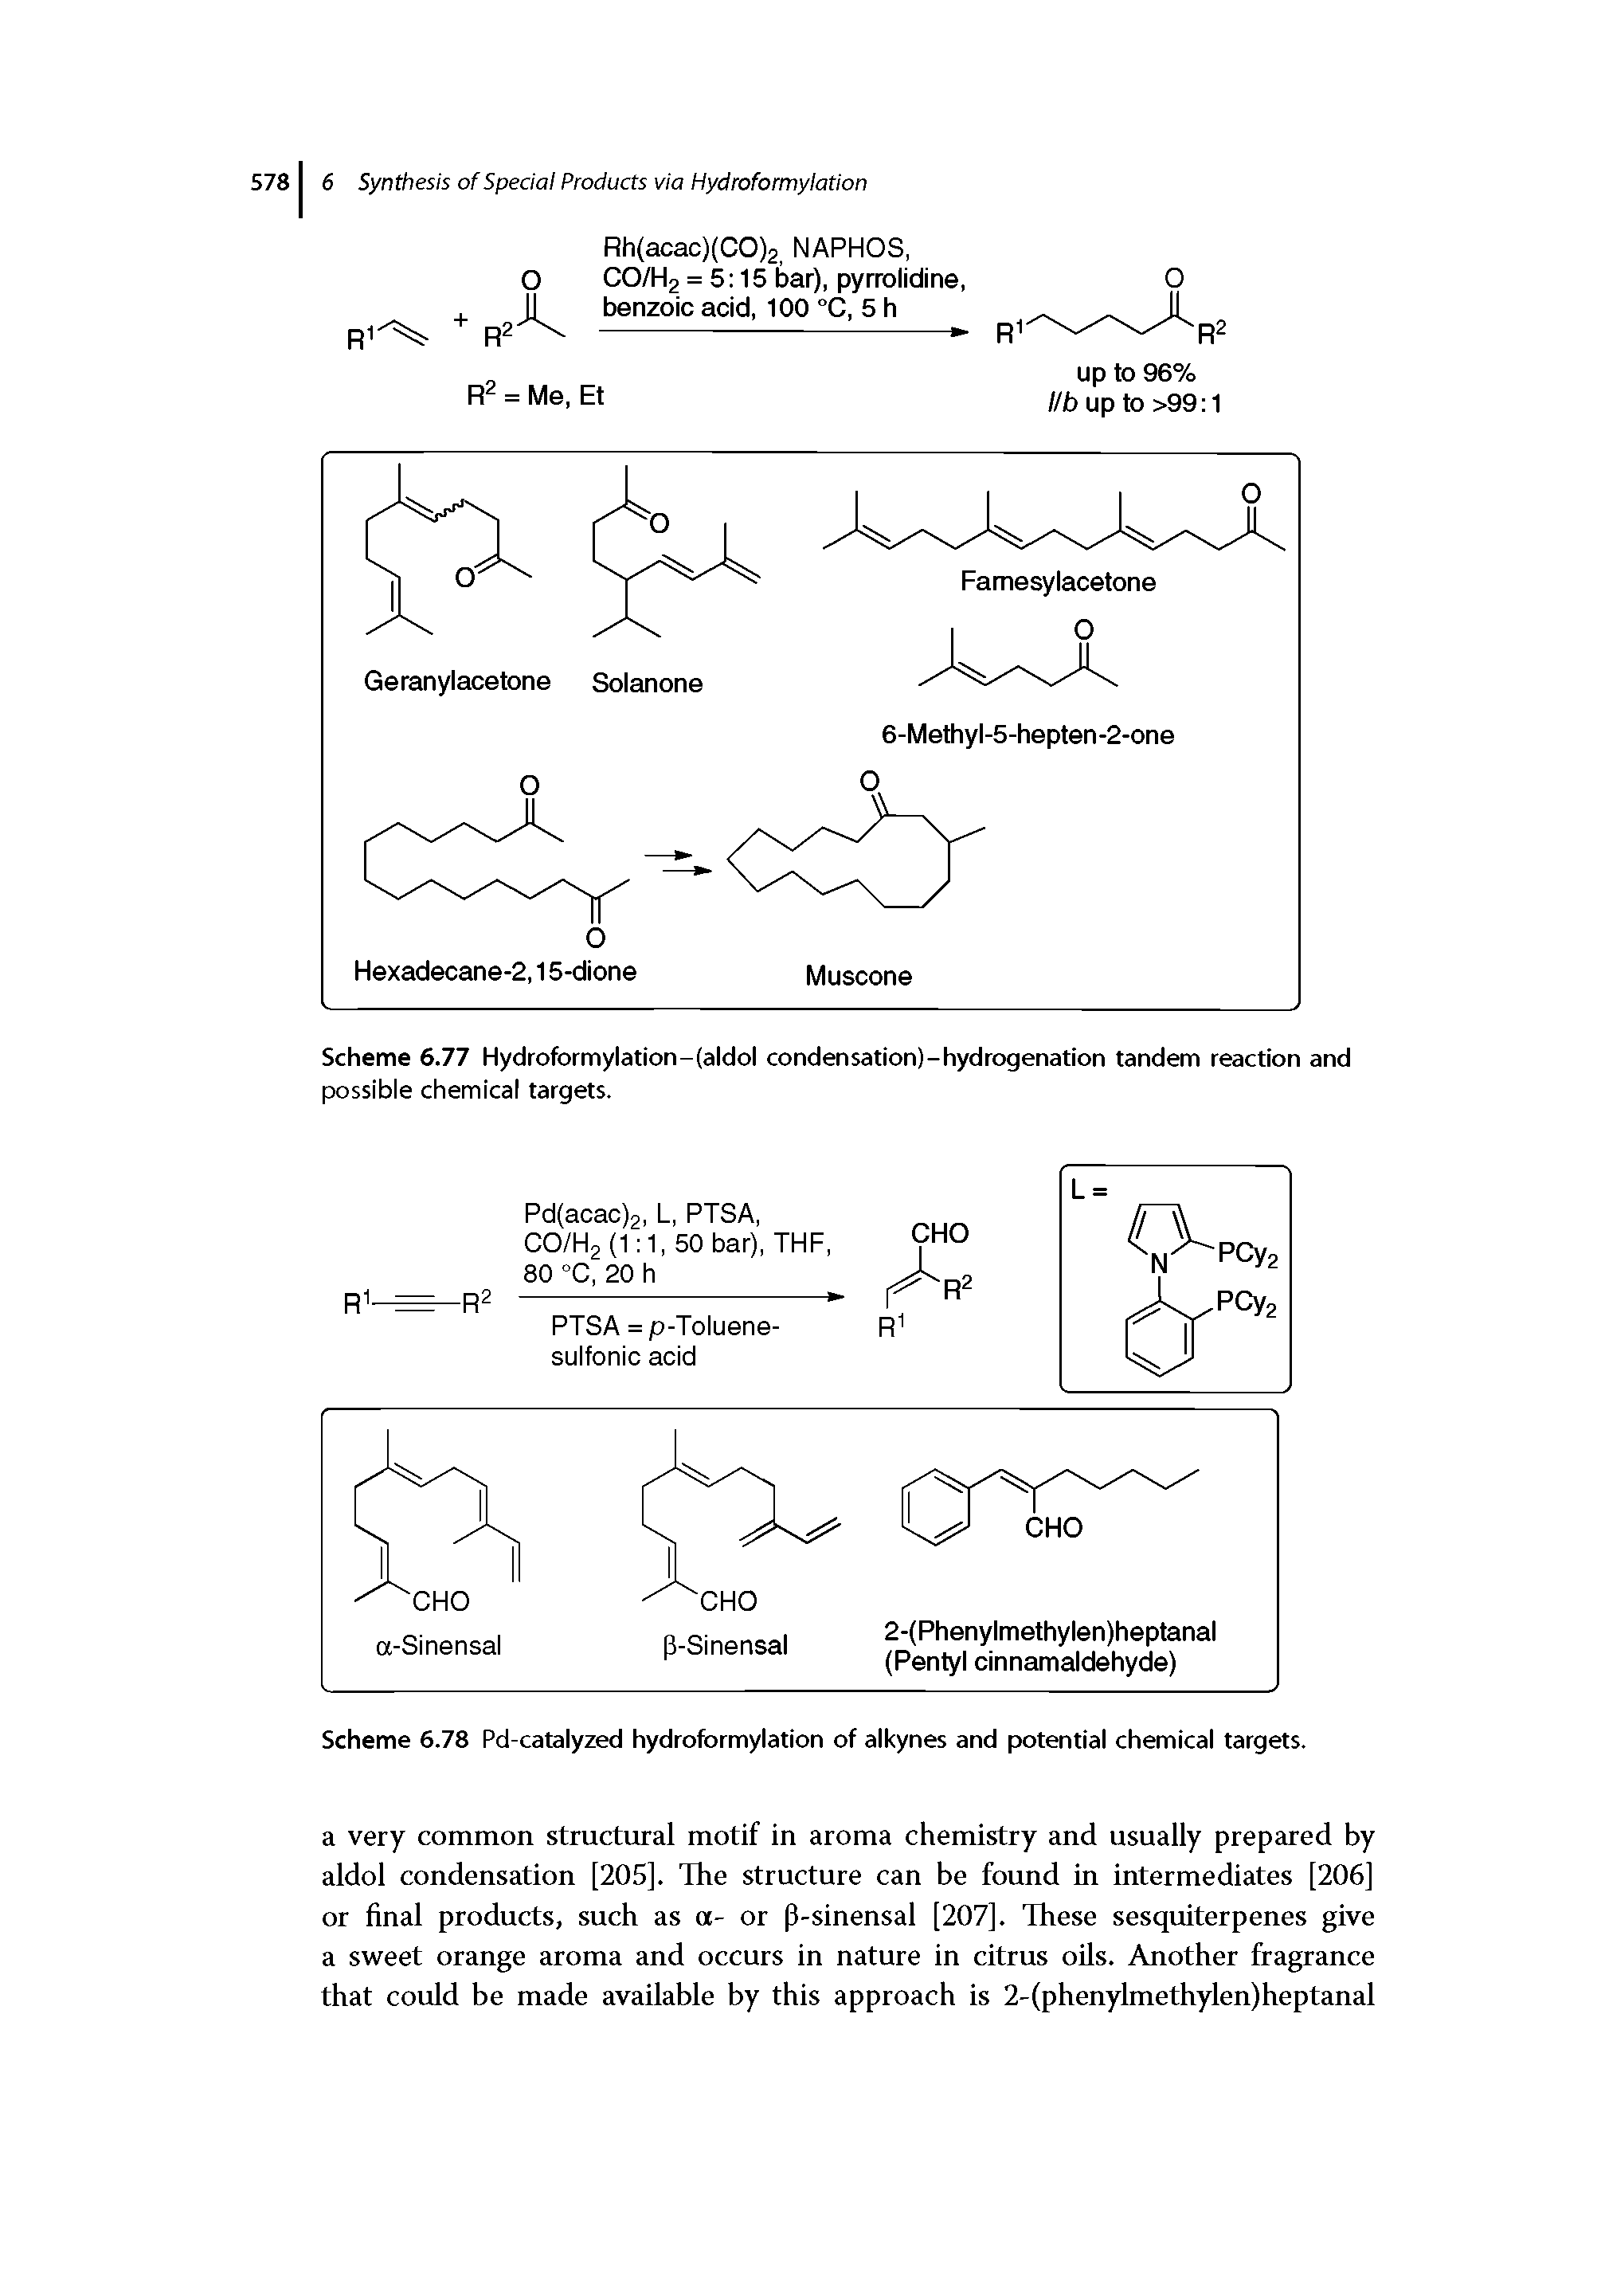 Scheme 6.78 Pd-catalyzed hydroformylation of alkynes and potential chemical targets.